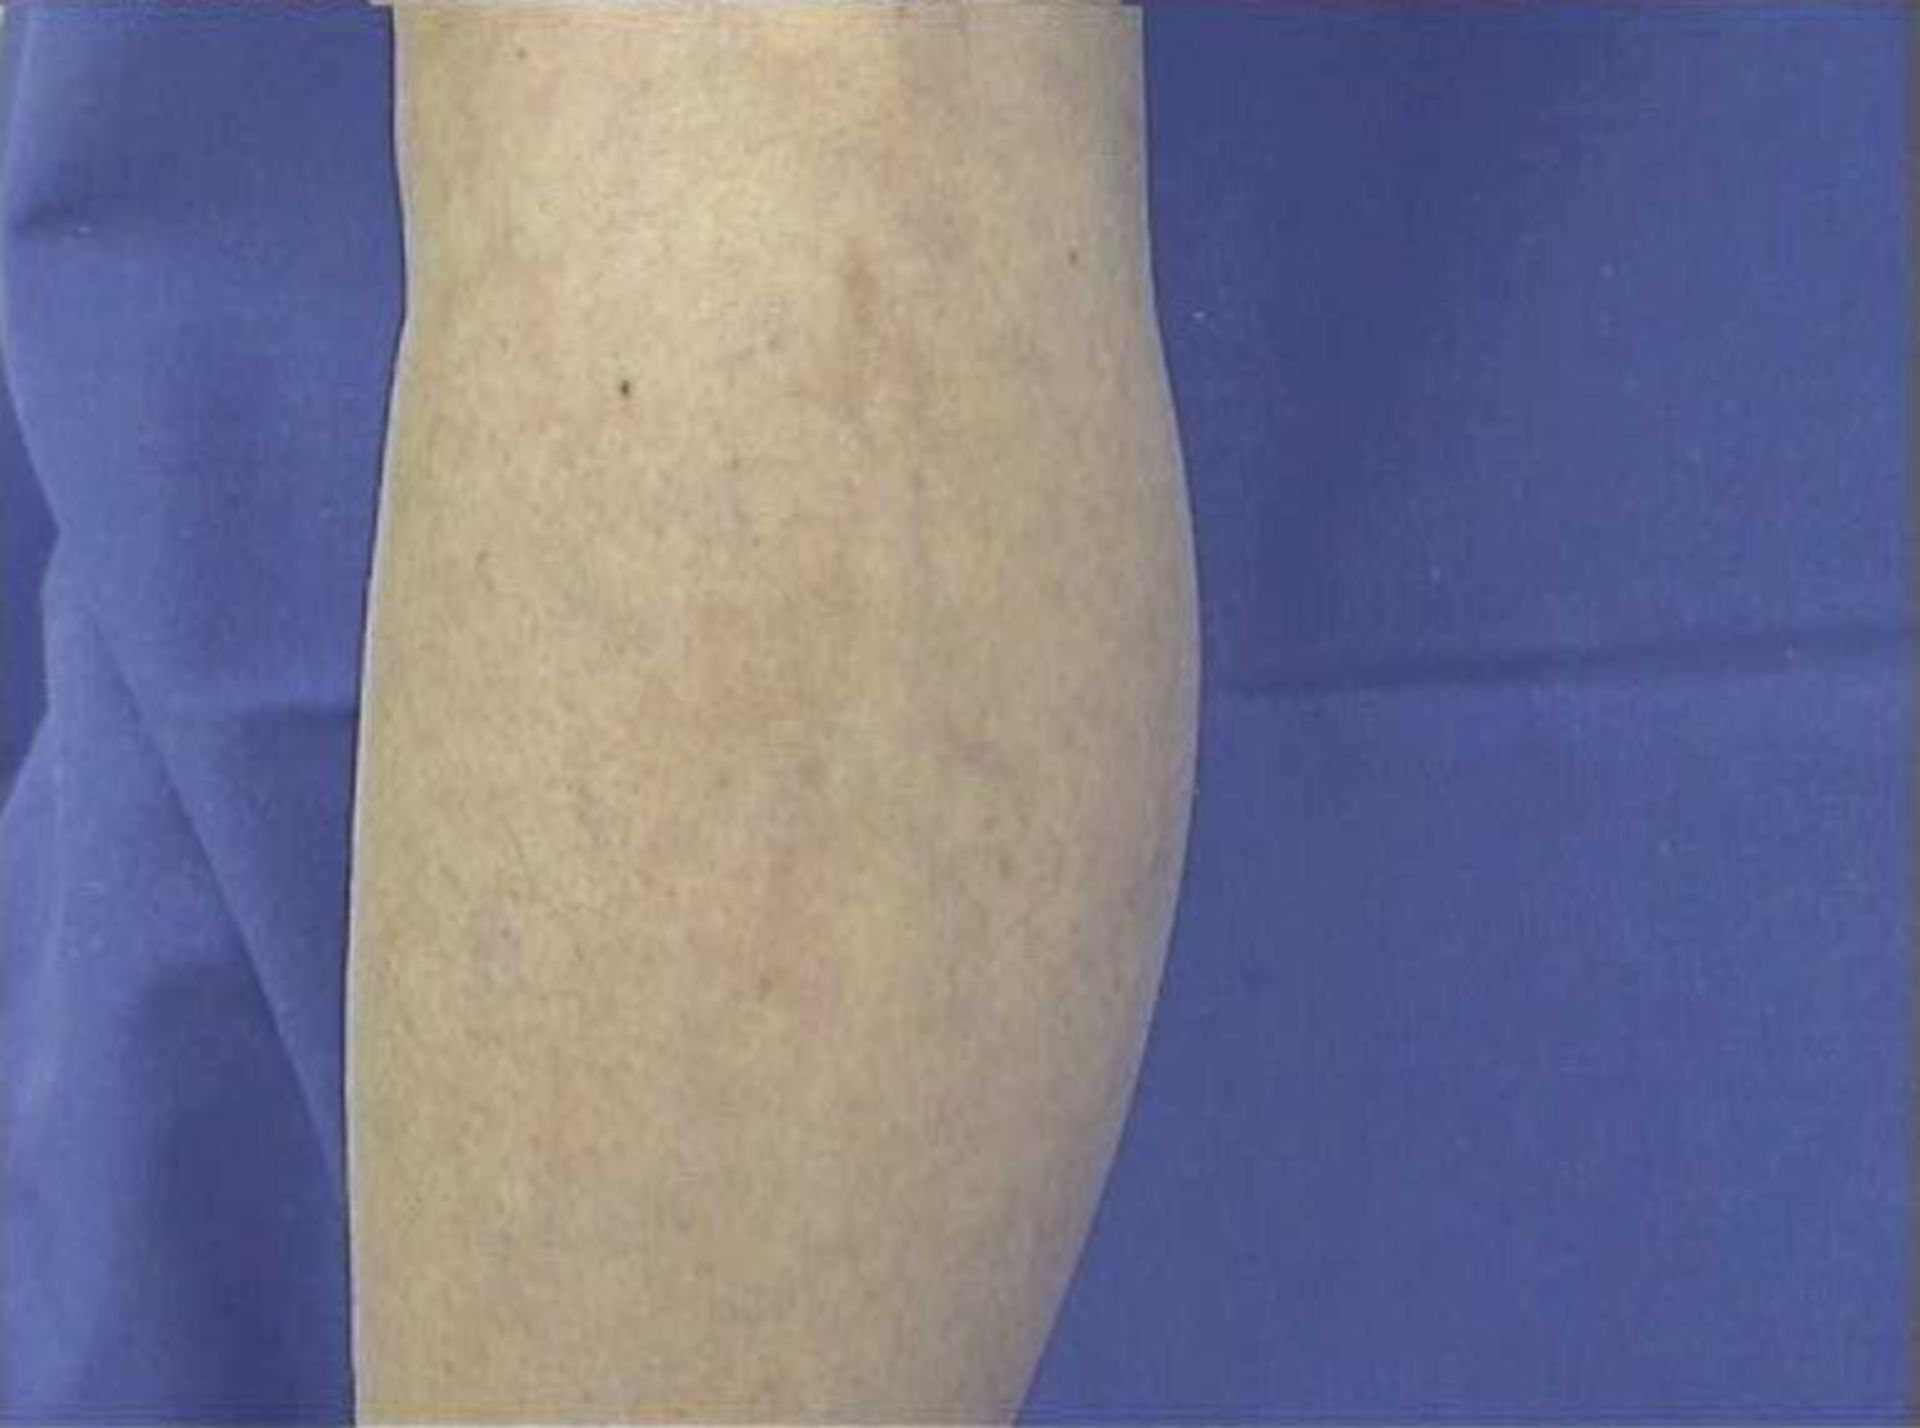 Post-therapeutic spider veins